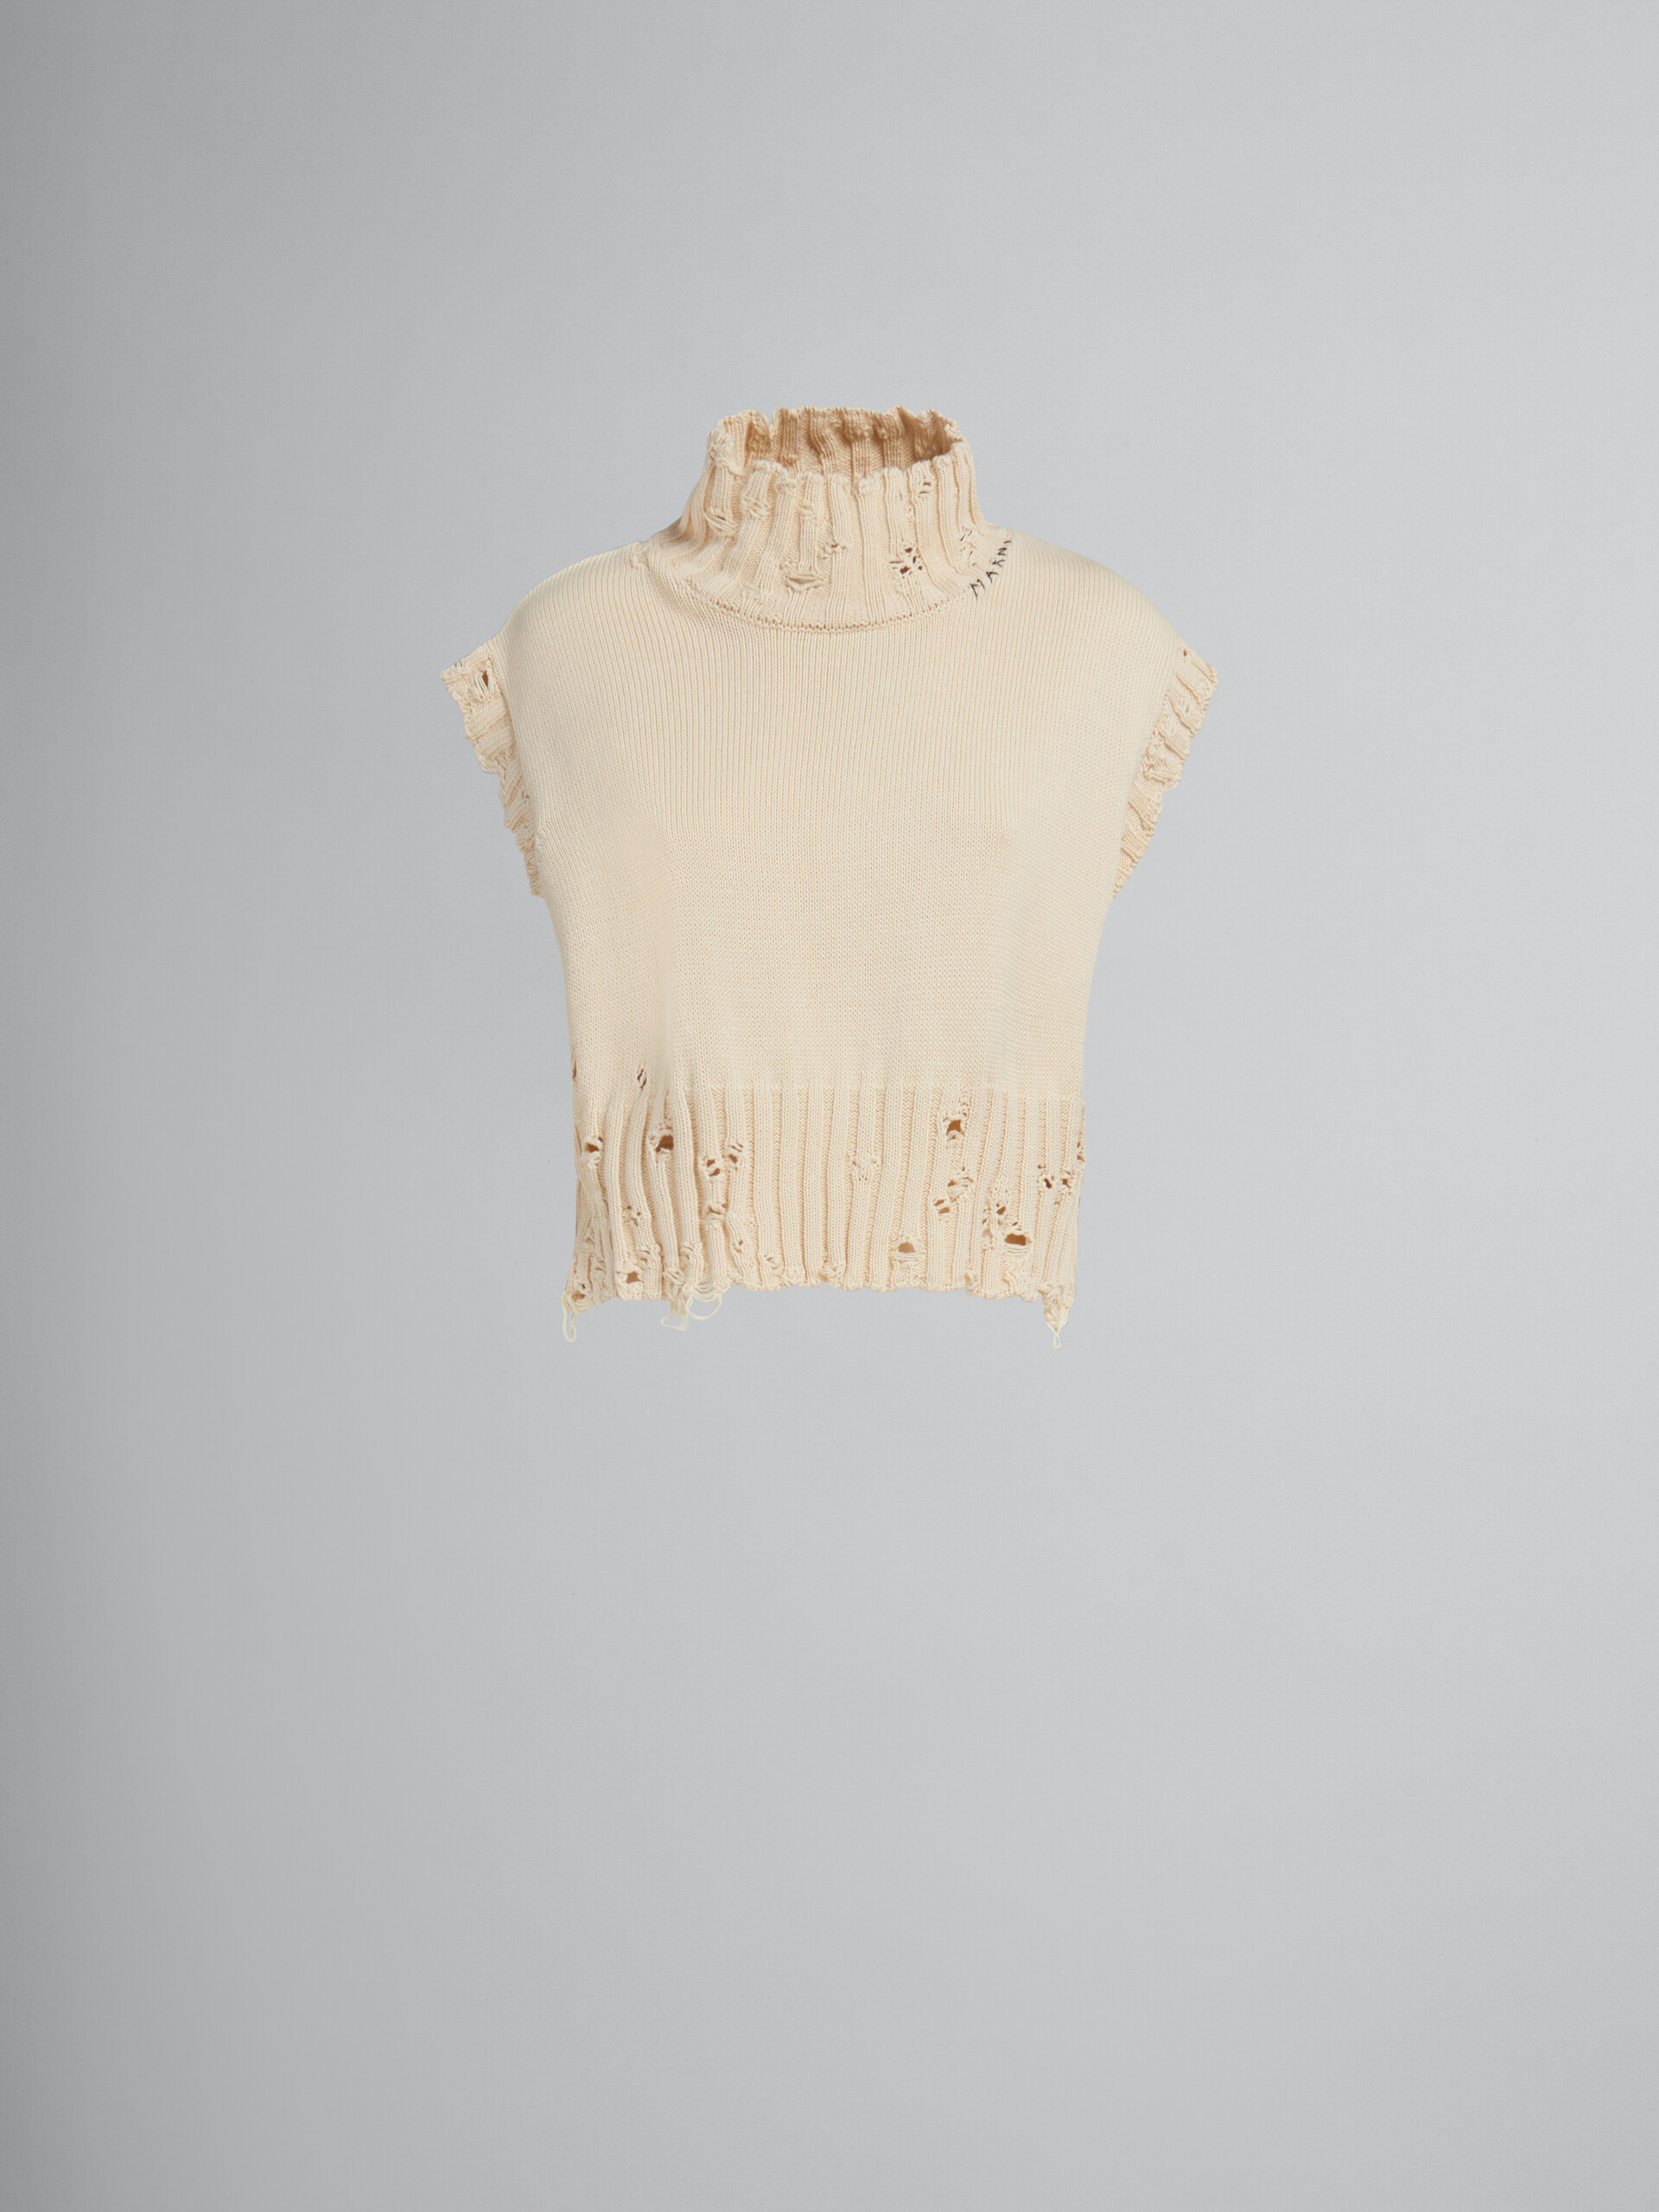 Cropped white cotton vest - Pullovers - Image 1